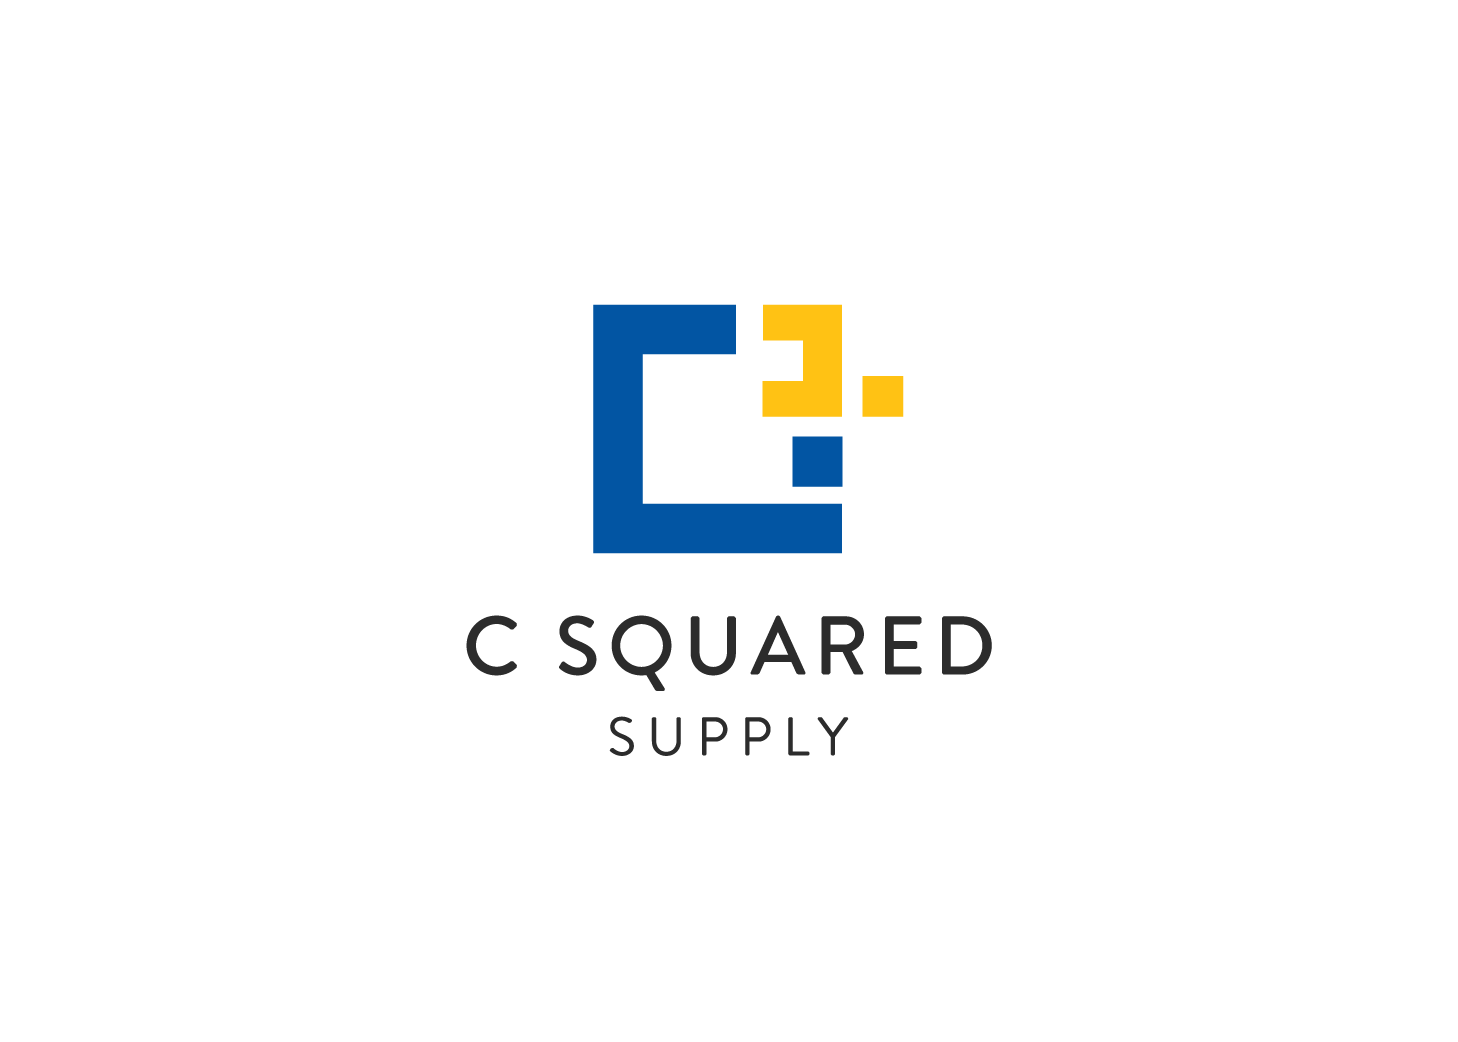 Square D Logo - Serious, Professional, Business Logo Design for C Squared Supply